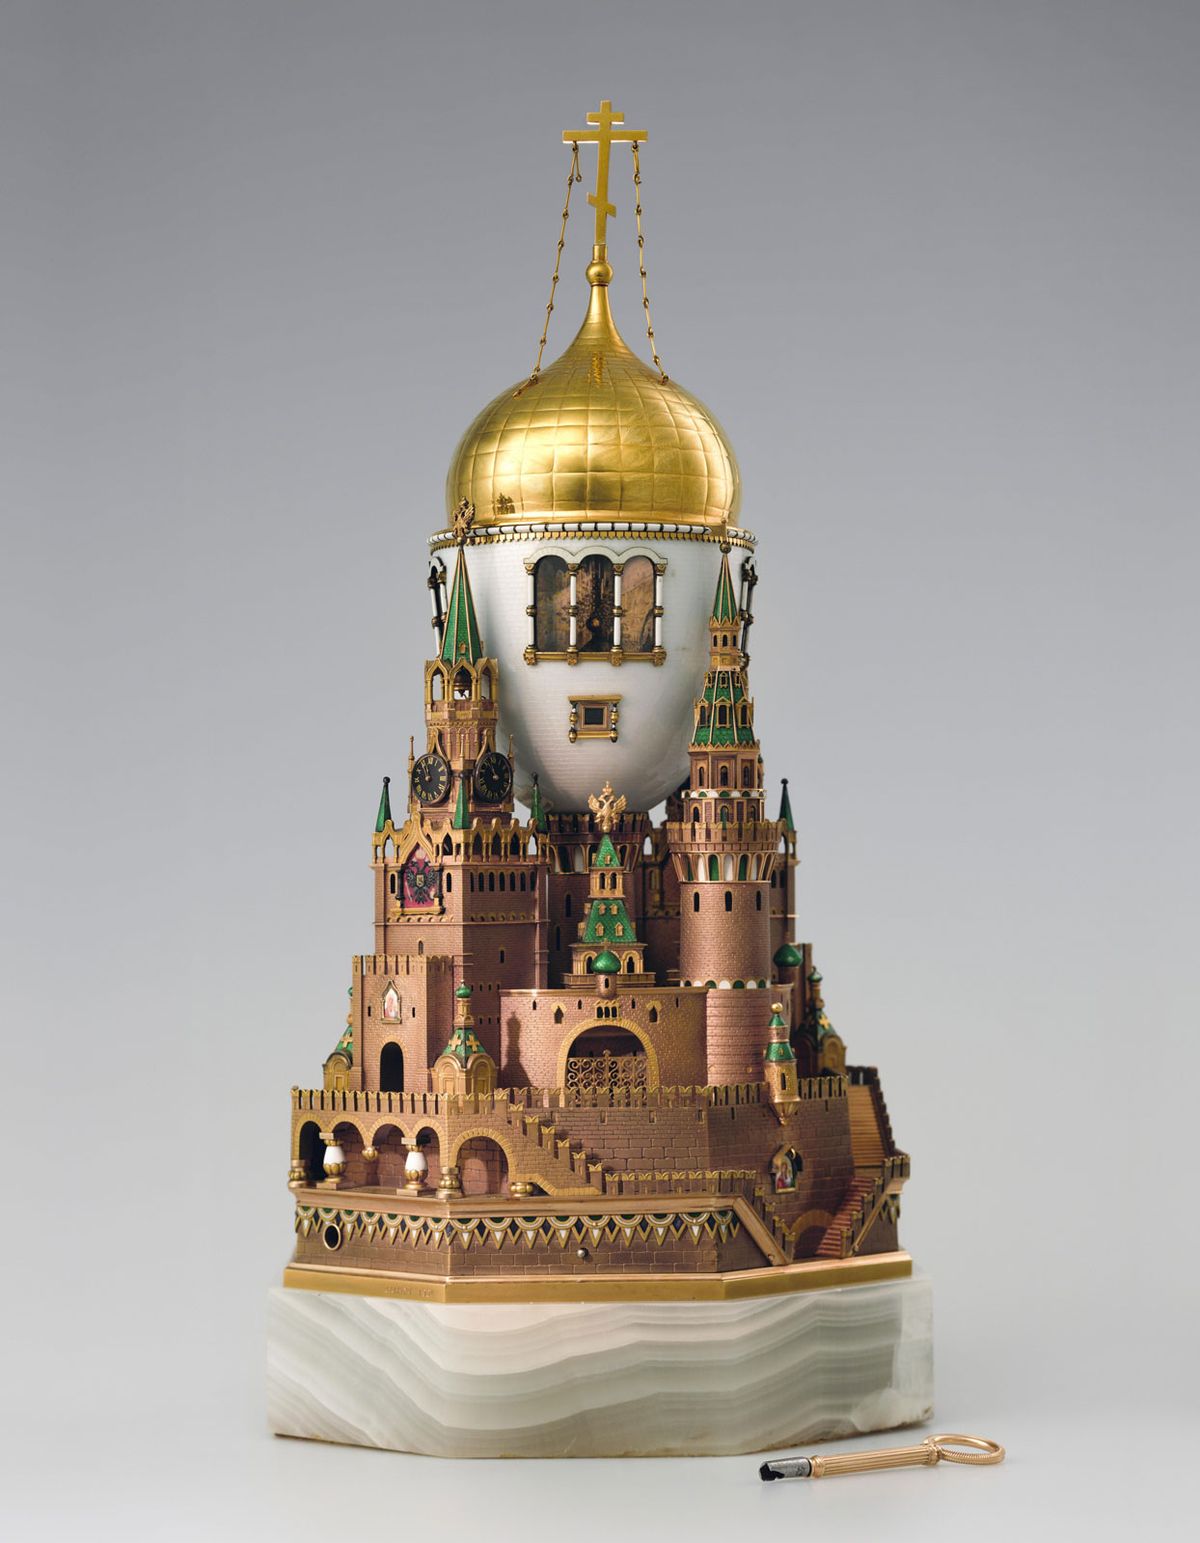 The Moscow Kremlin Easter egg (1904–06) made by the House of Fabergé was a gift from Nicholas II to Alexandra Feodorovna © Moscow Kremlin Museums